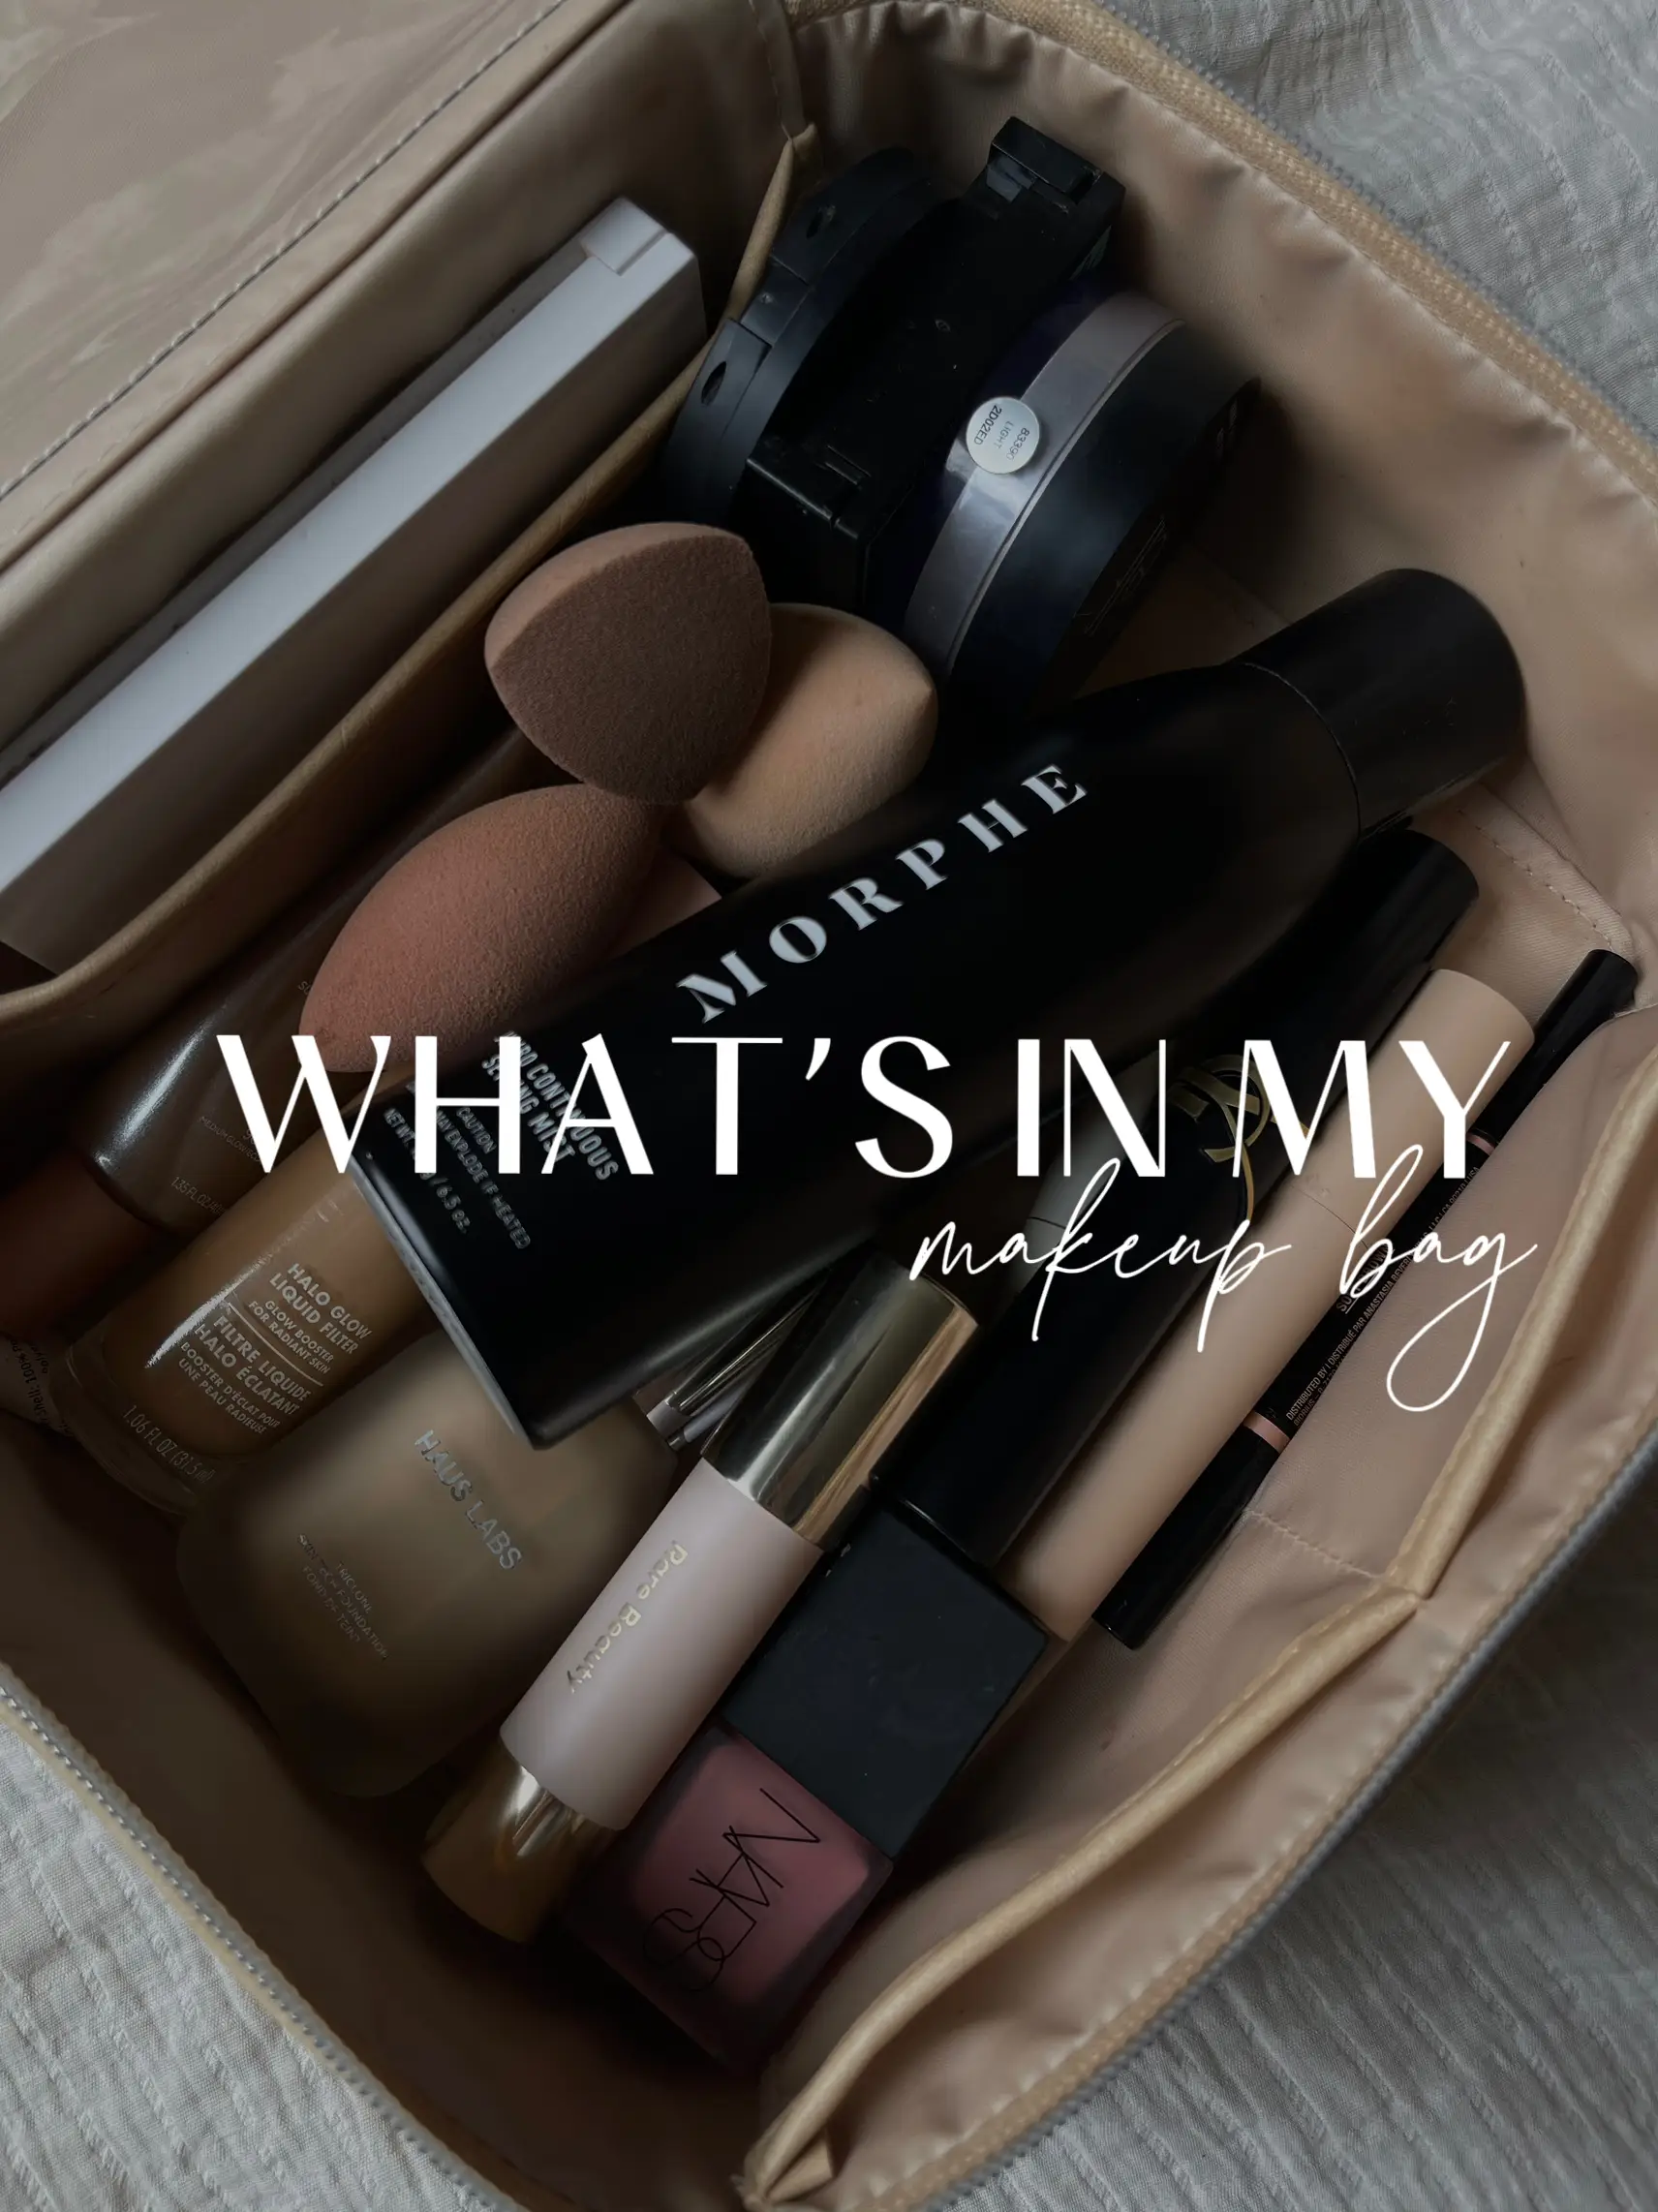 Win It! Make Up For Ever x Christina Ricci Limited Edition Makeup Bag!